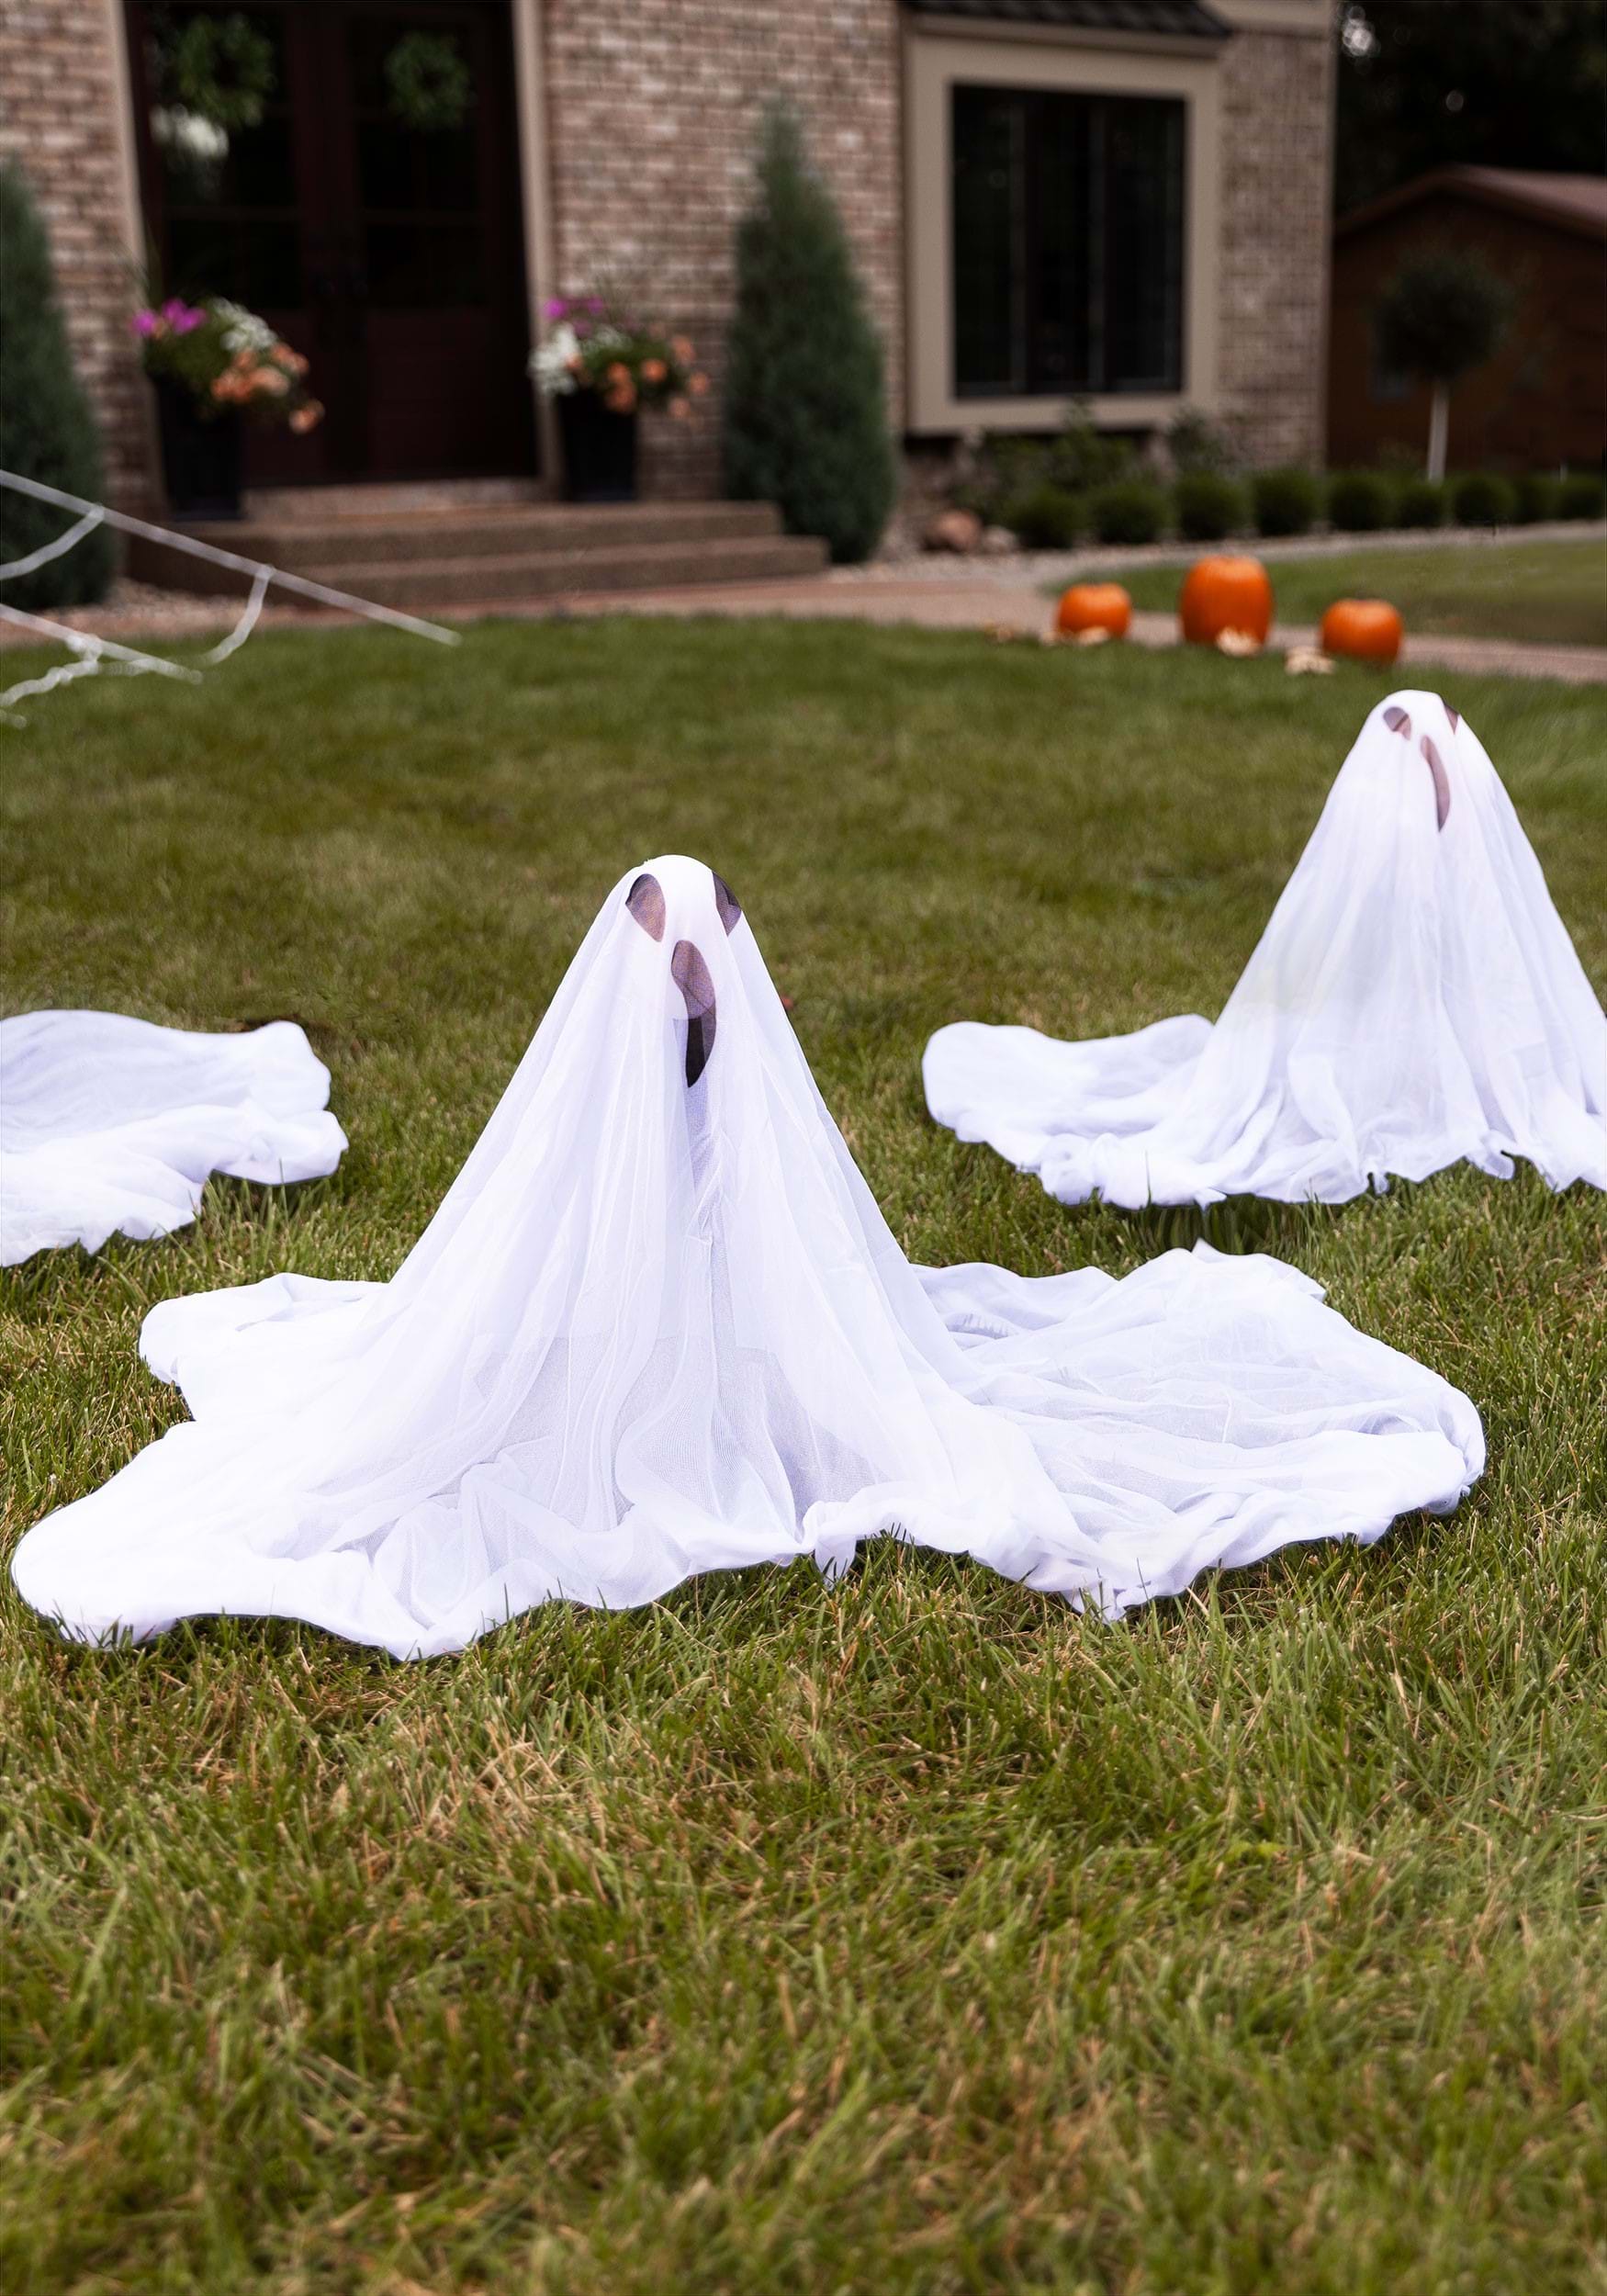 Set of 3 Ghostly Halloween Prop